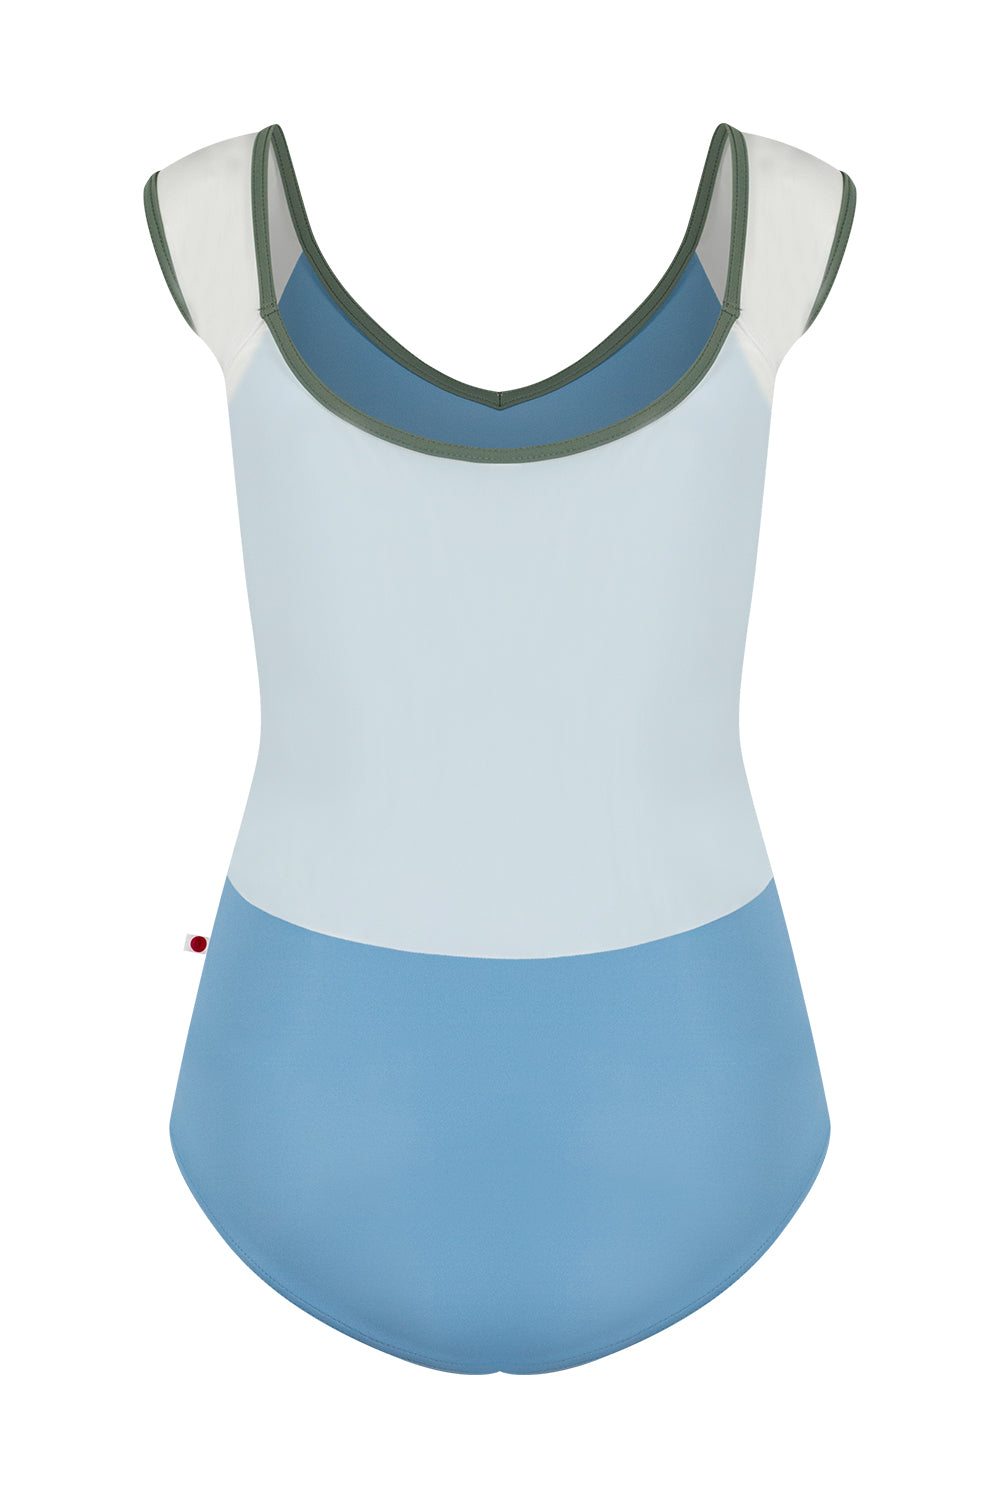 Nina leotard in T-Bluebell body color with Mesh White top color and T-Sage trim color